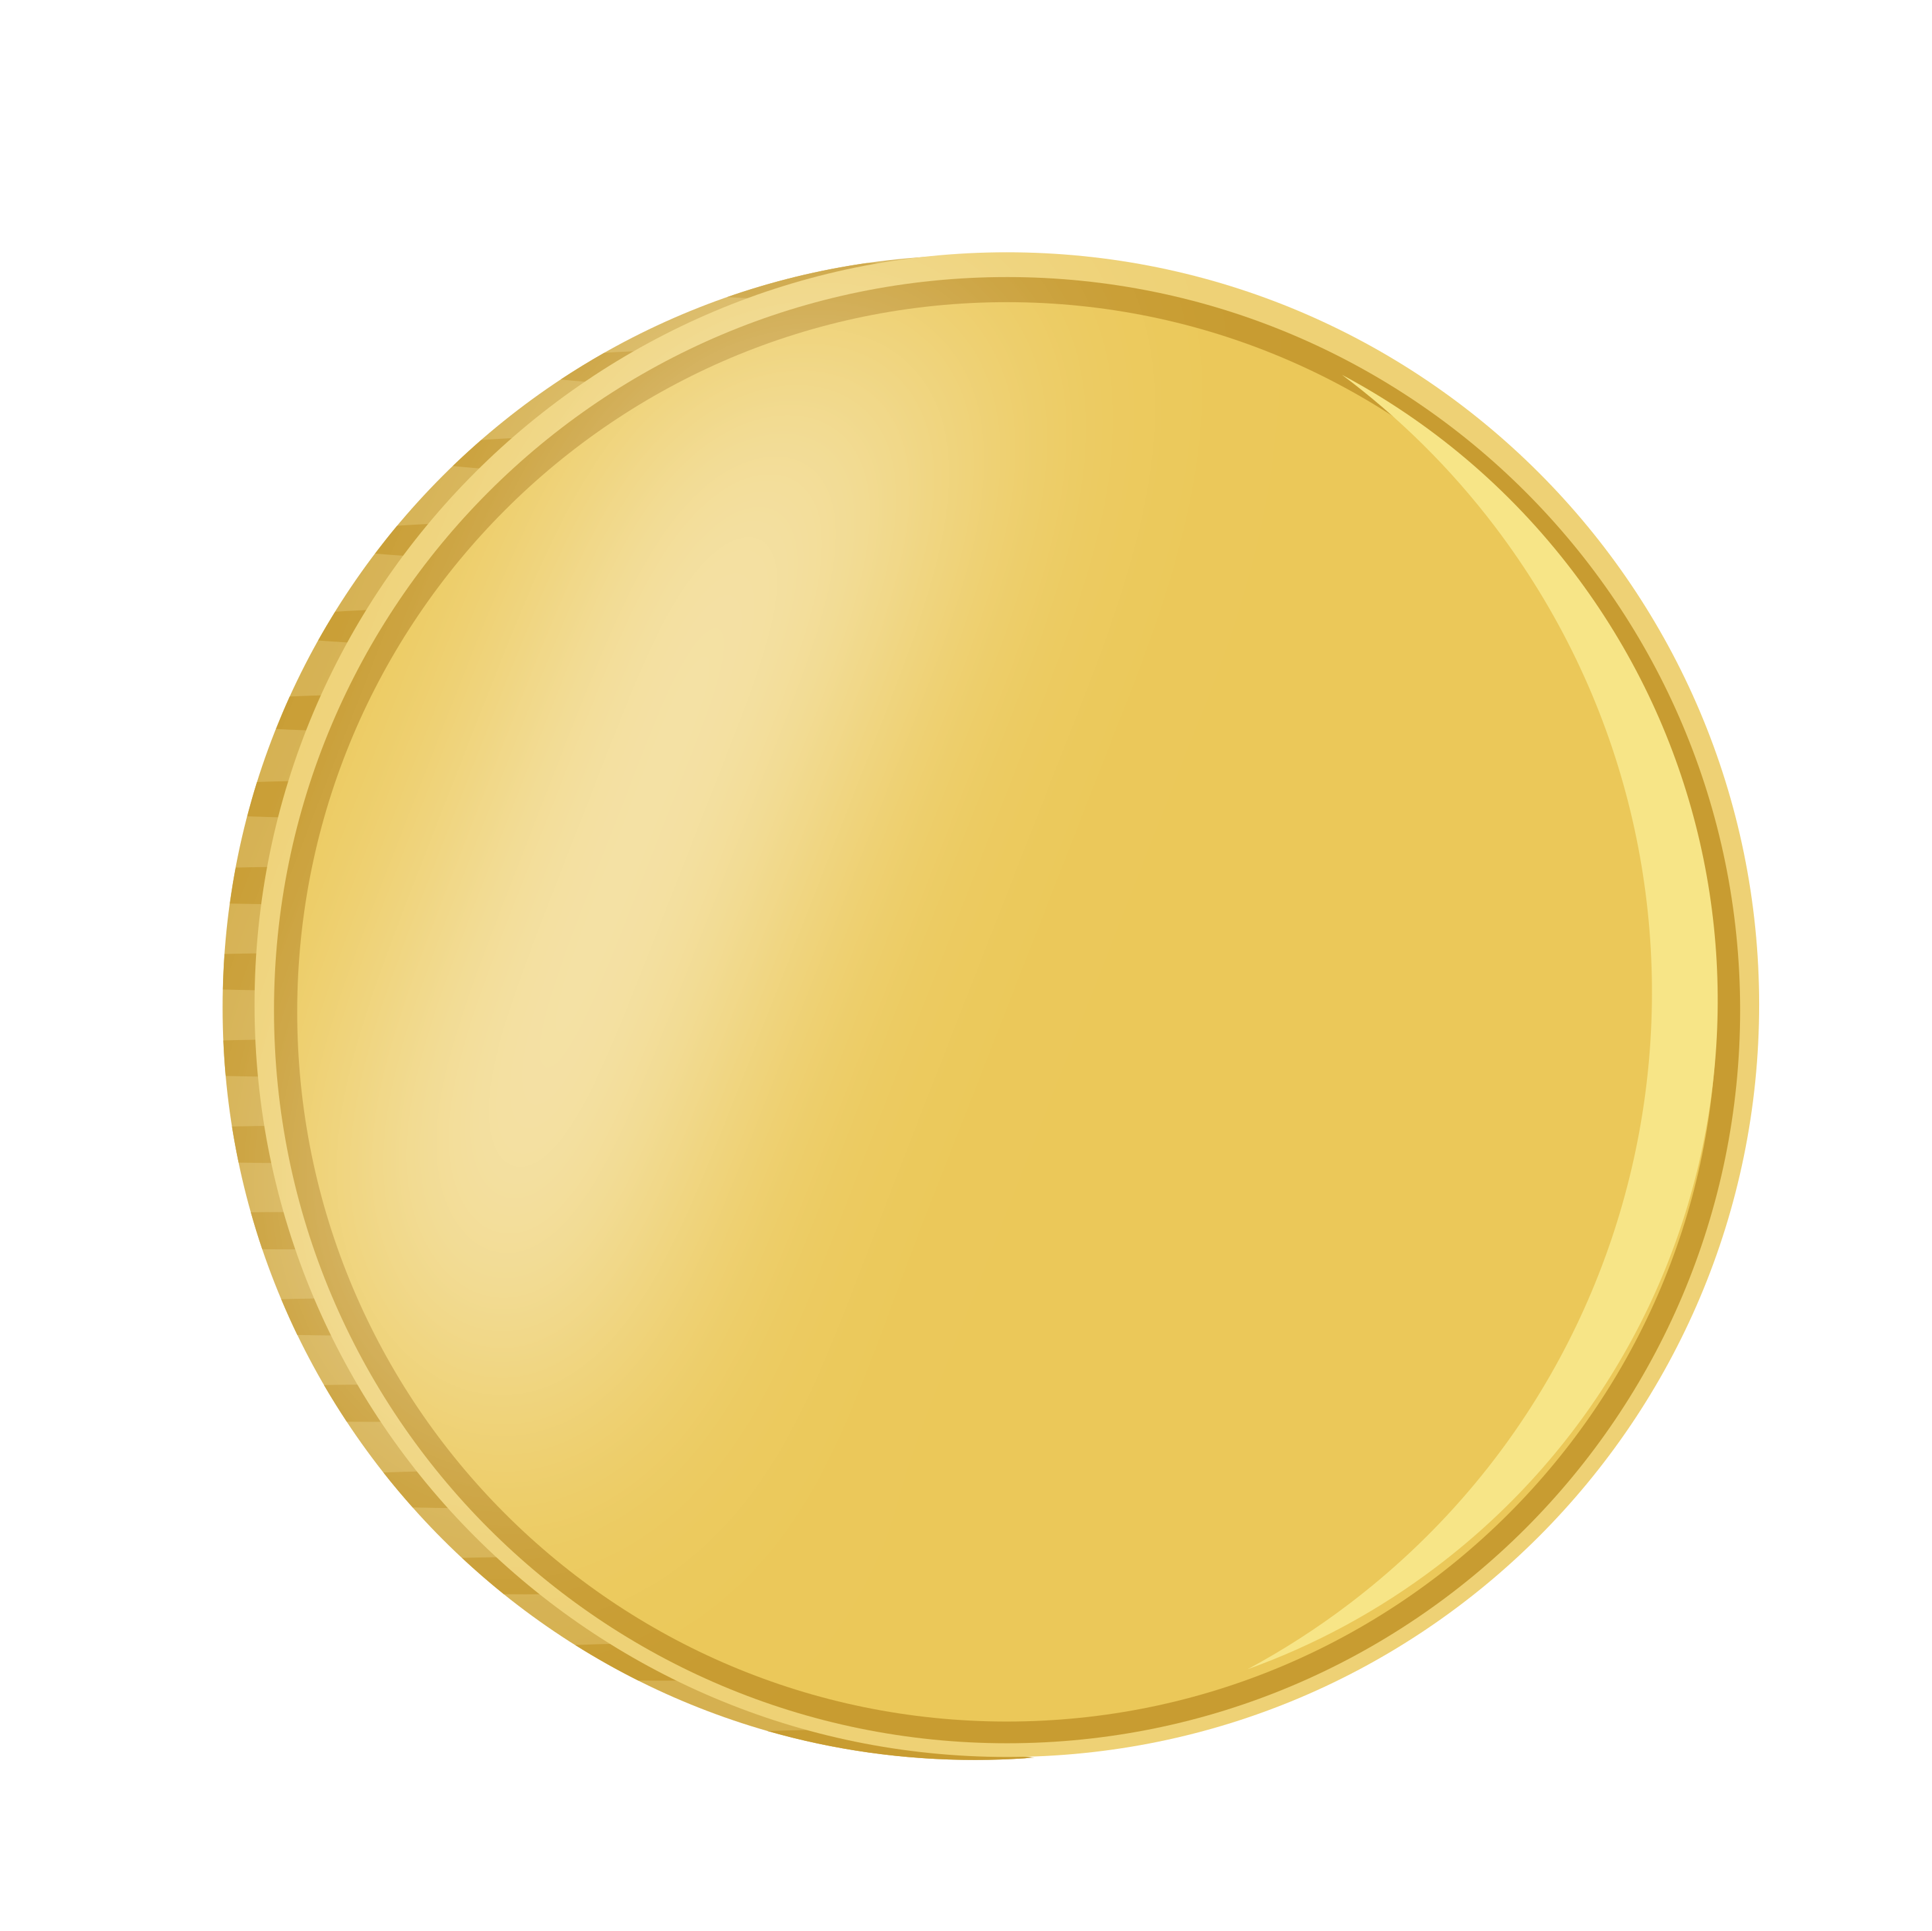 Coin PNG Image in High Definition pngteam.com